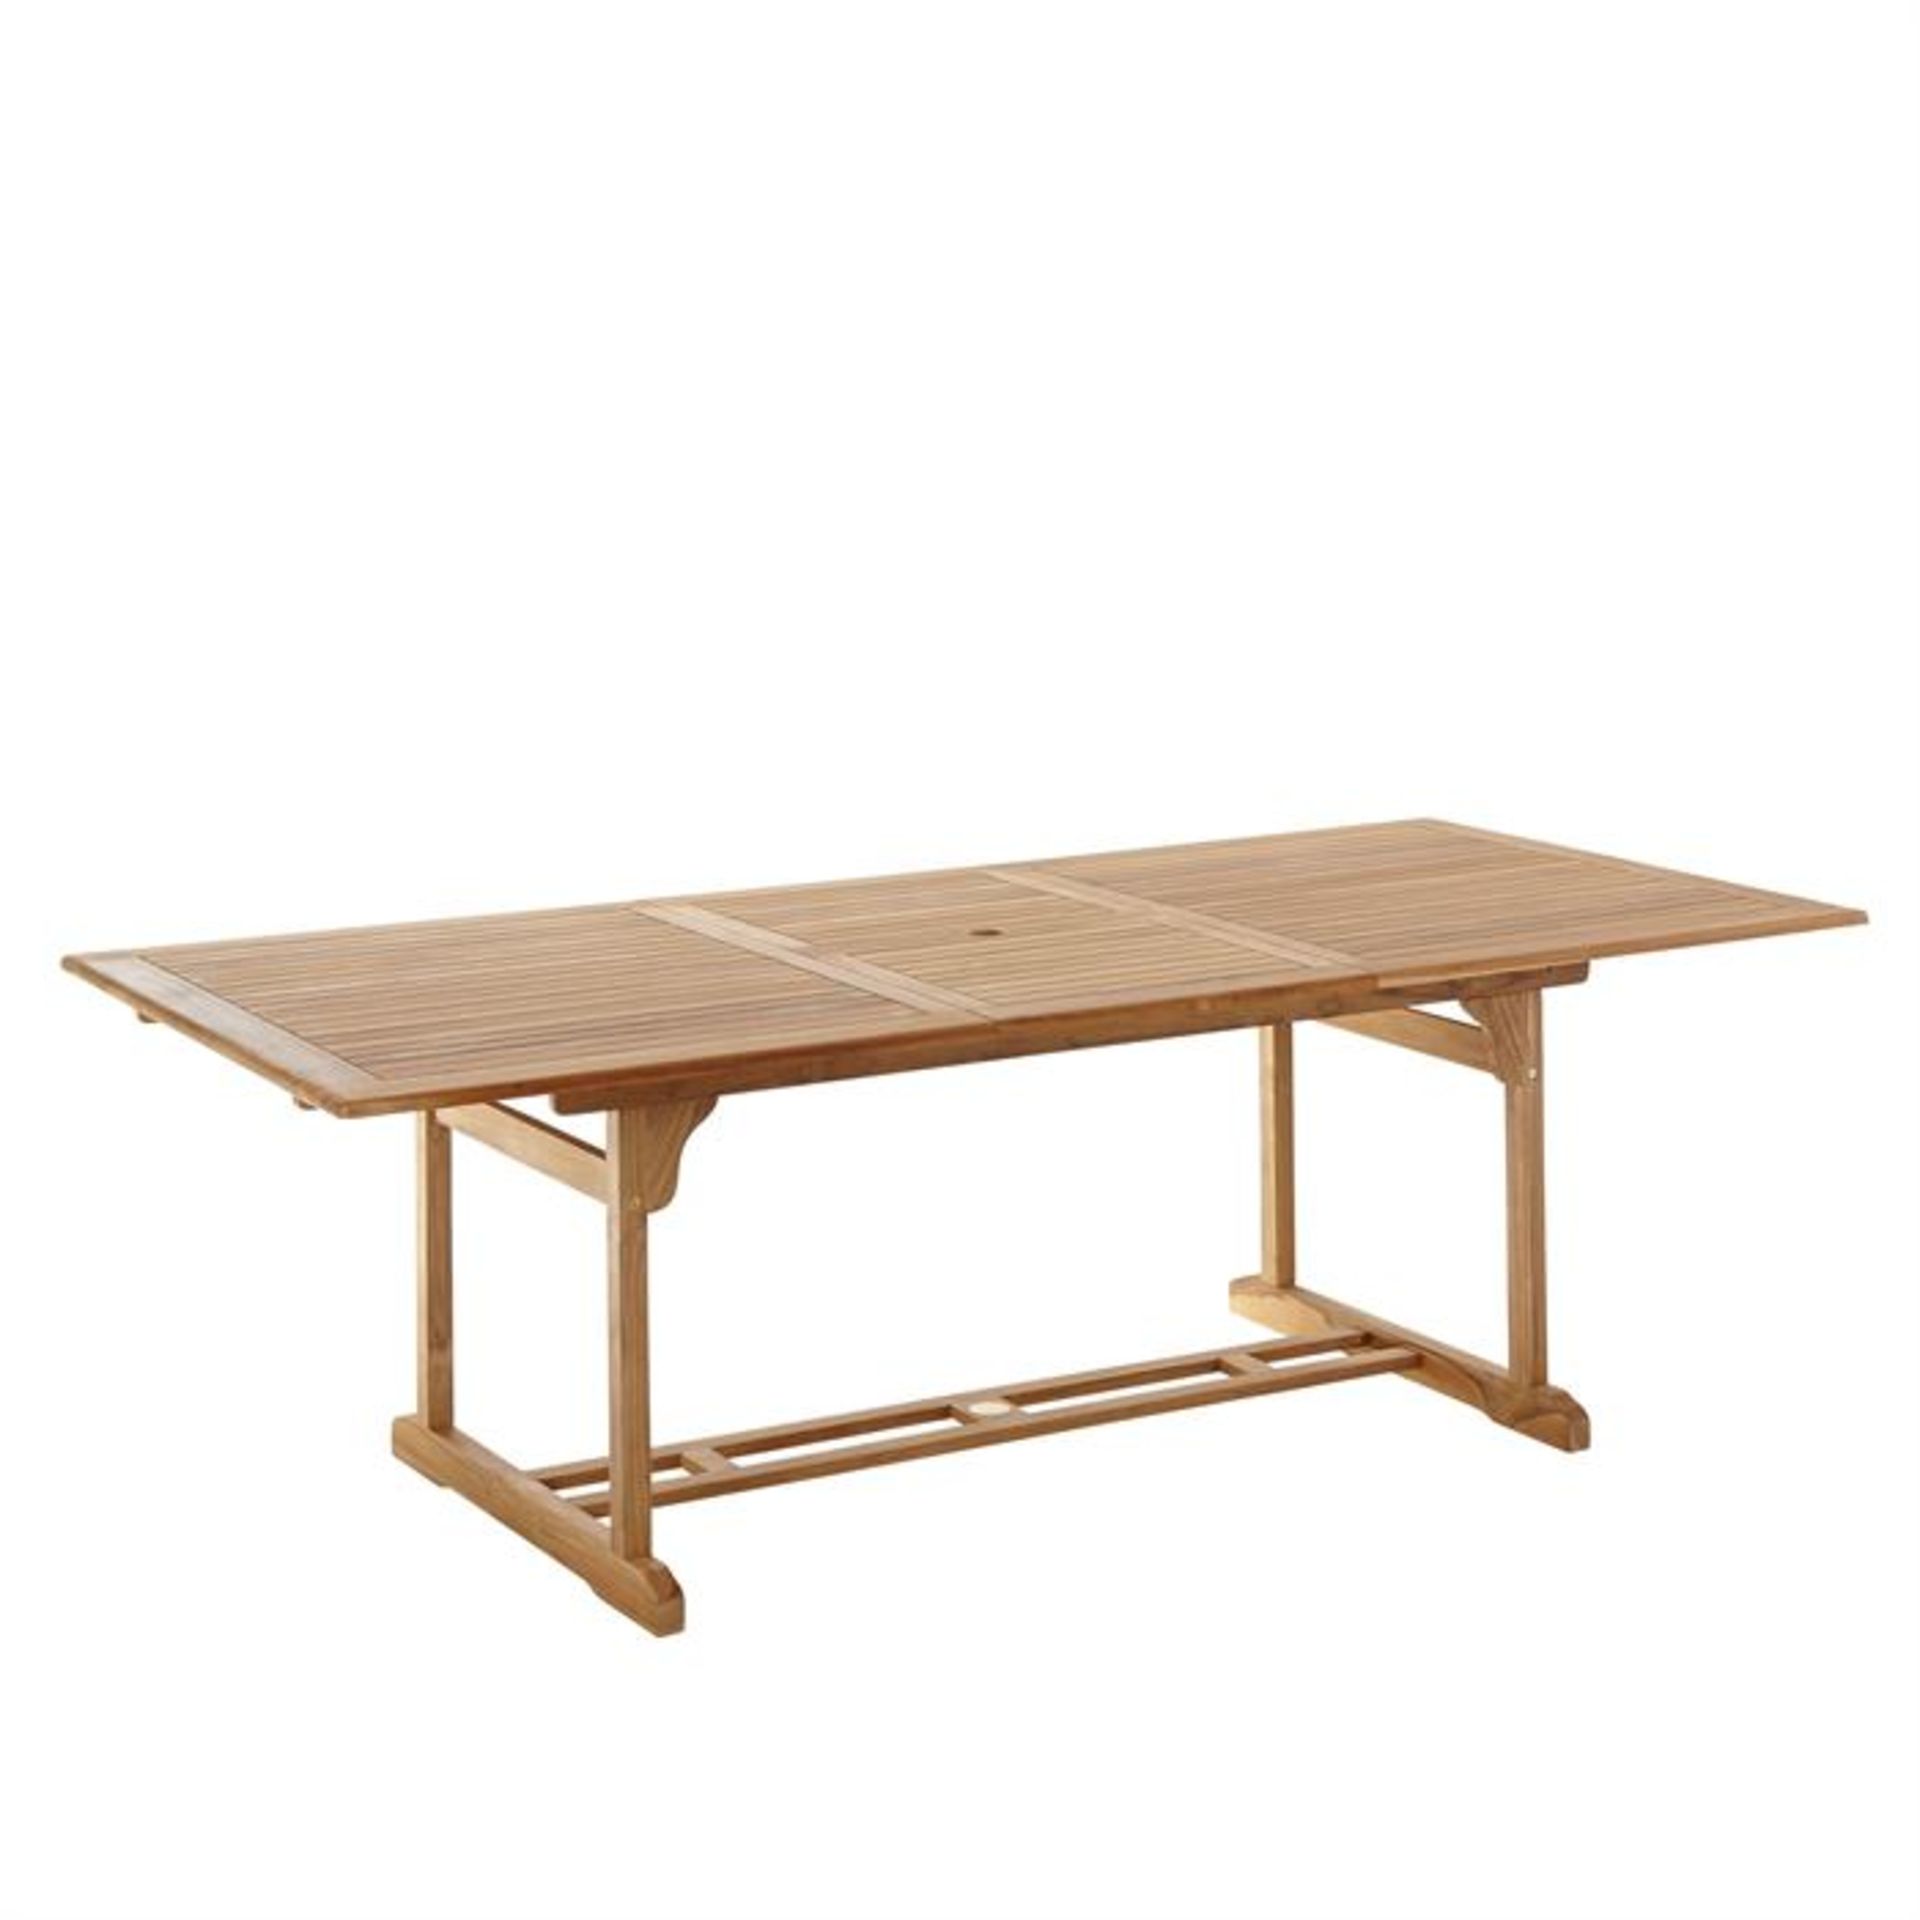 Roscana Teak Wooden 6 Seater Dining Table - RRP £240 - Image 5 of 5